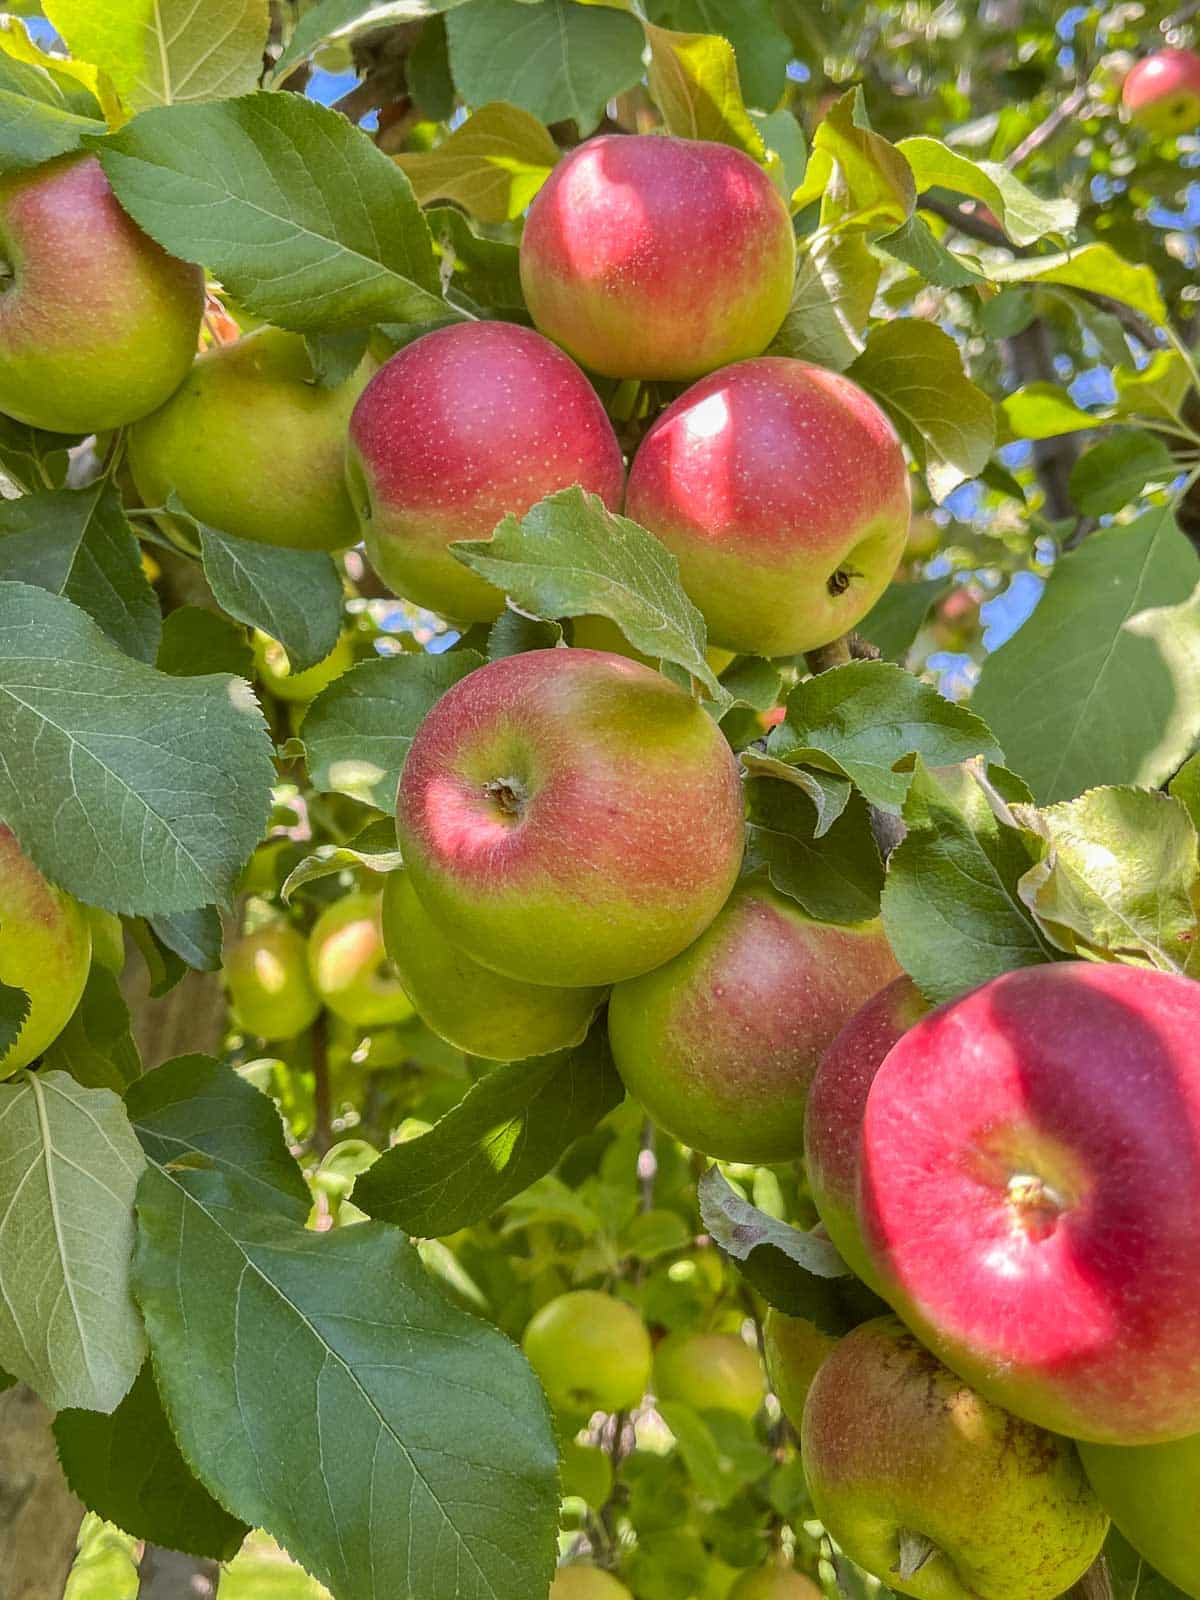 apple tree loaded with apples